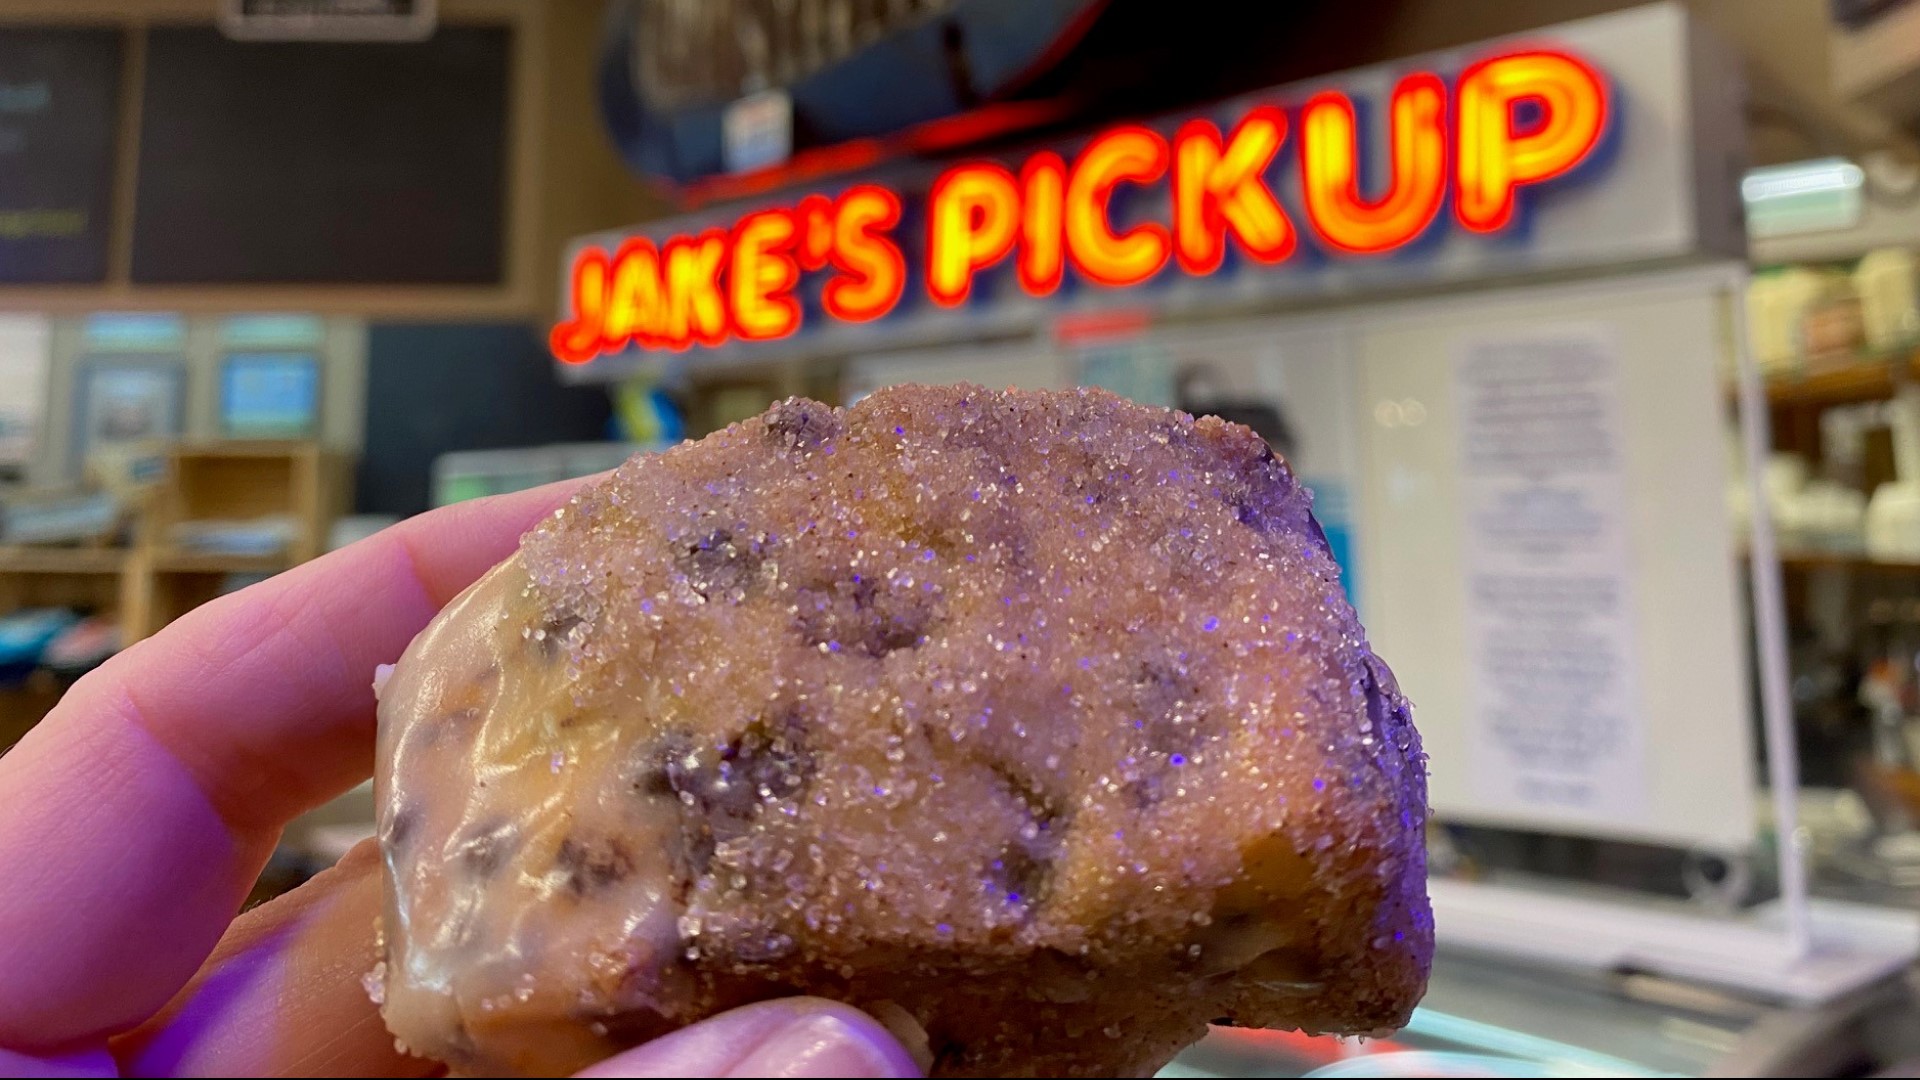 Jake's Pickup is also the only place you can get a Sconenut. #k5evening